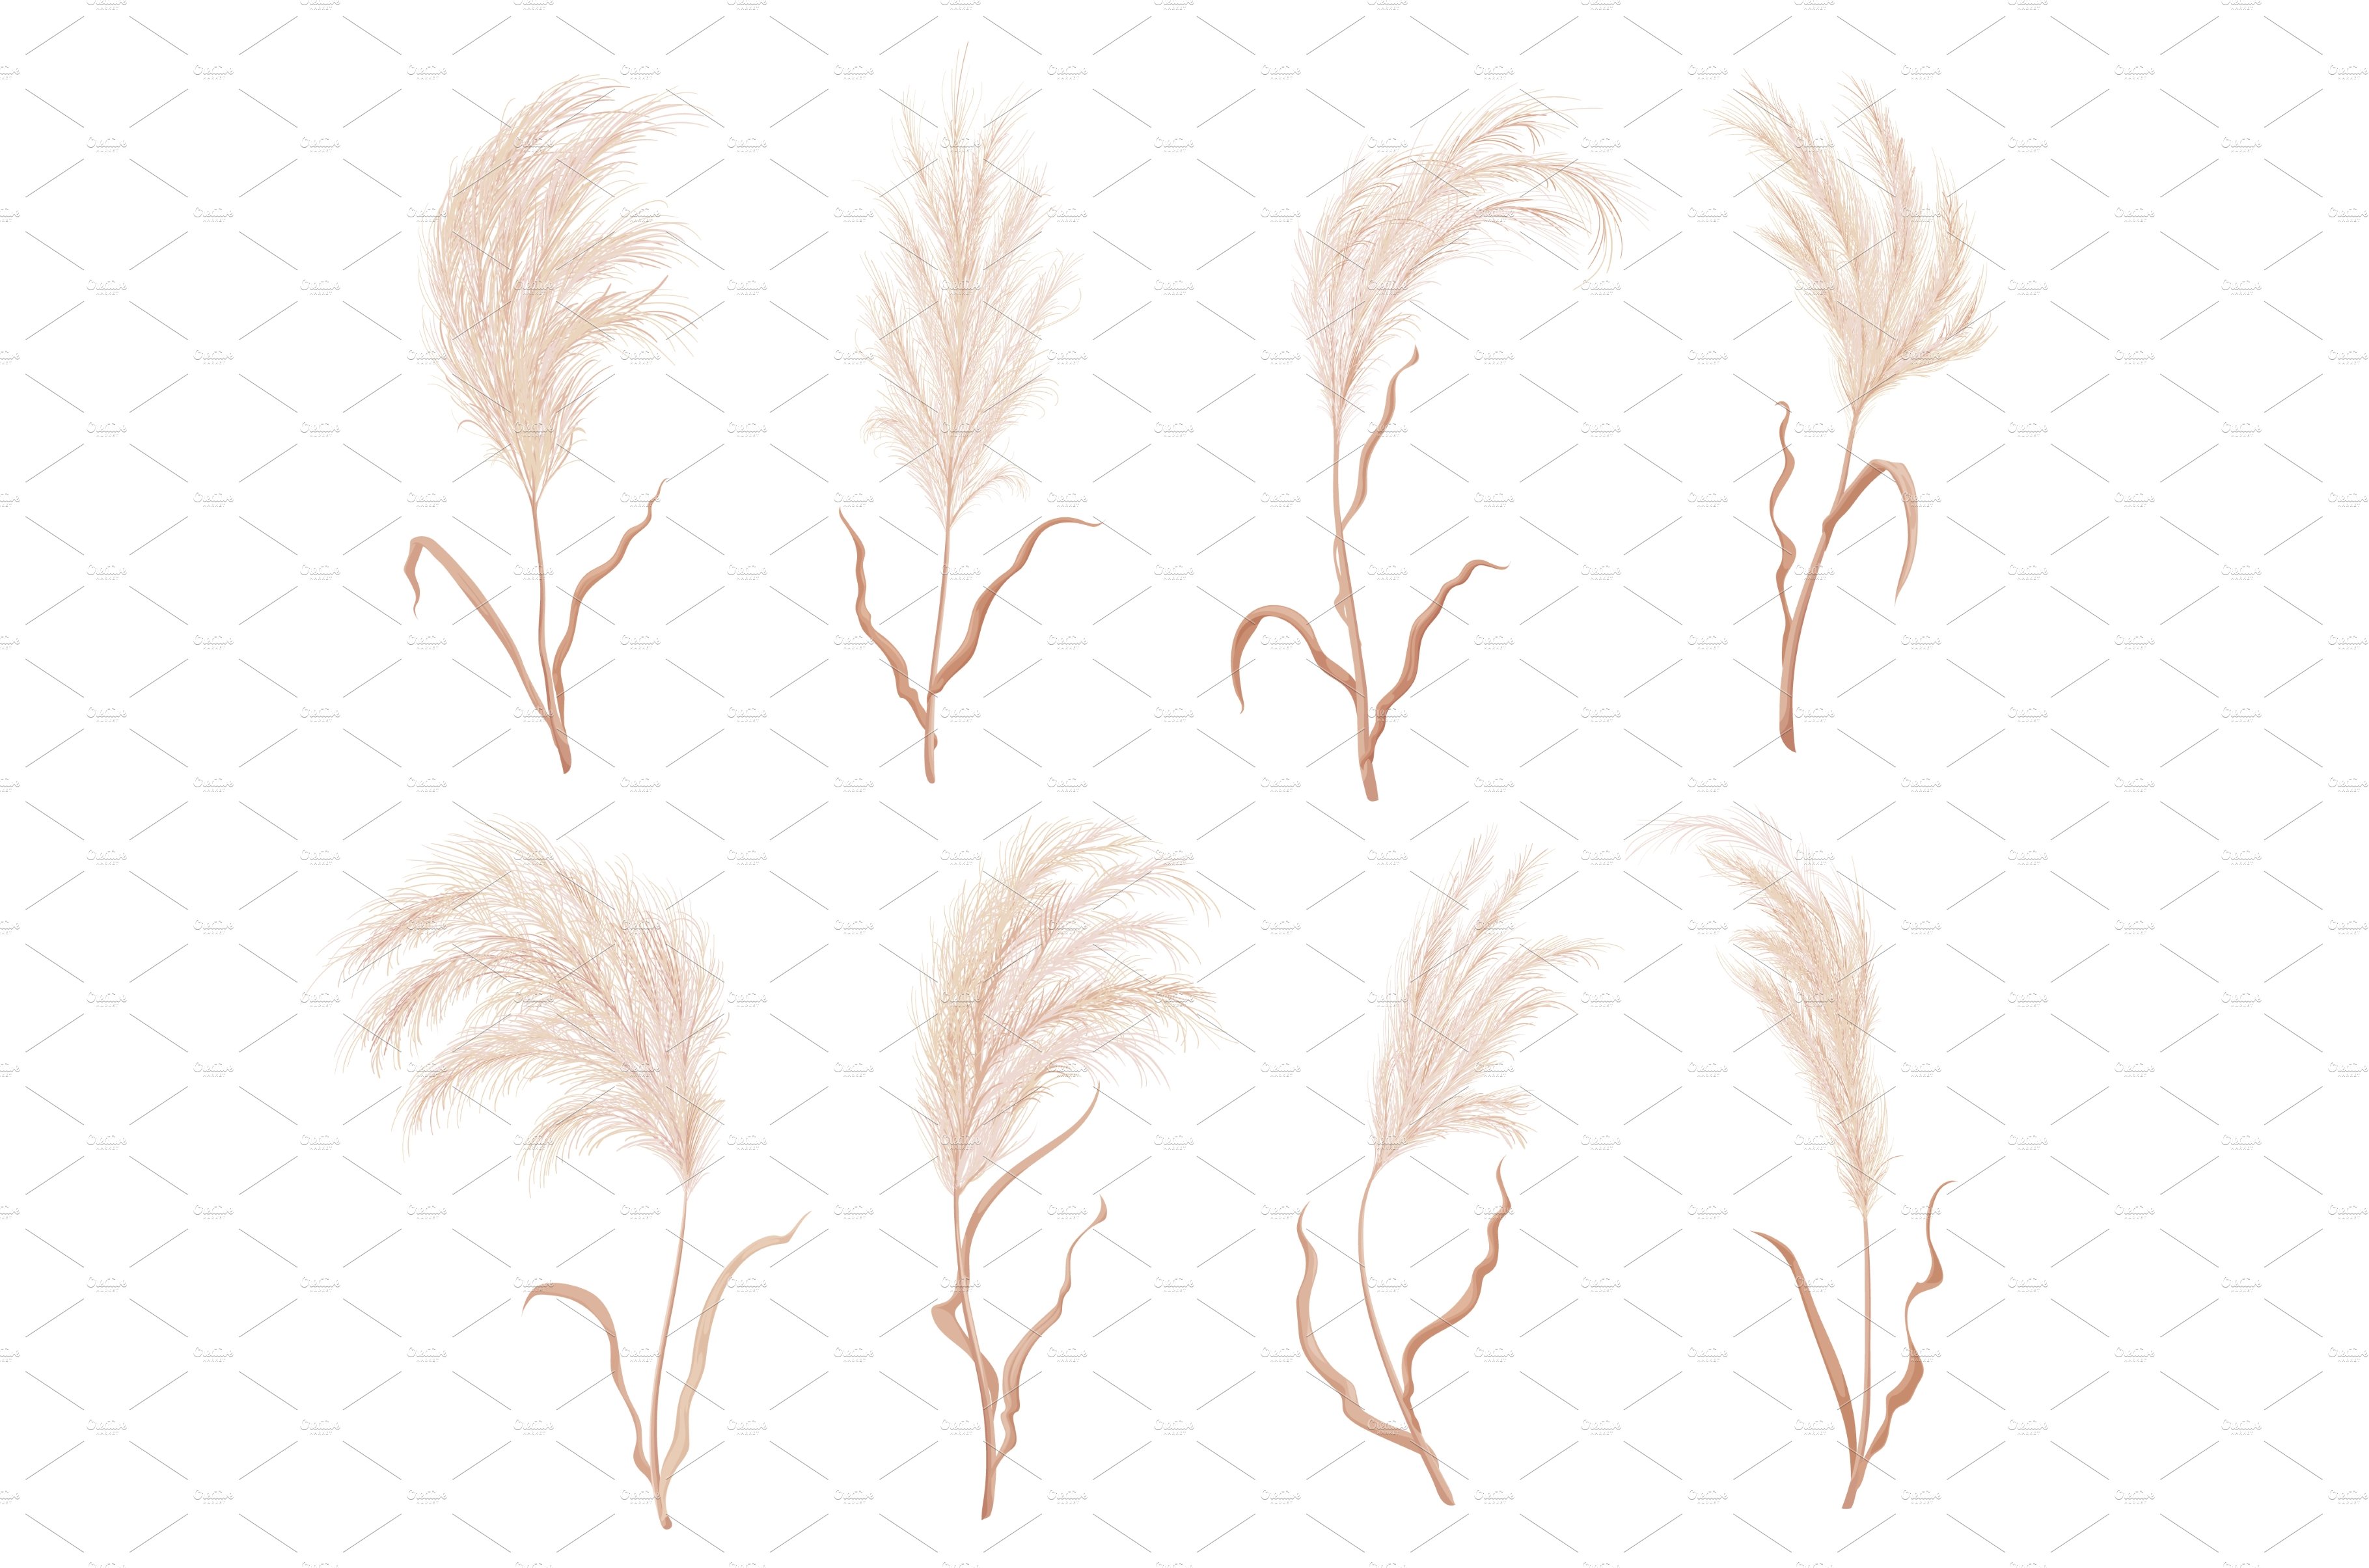 Bunch of dry grass on a white background.